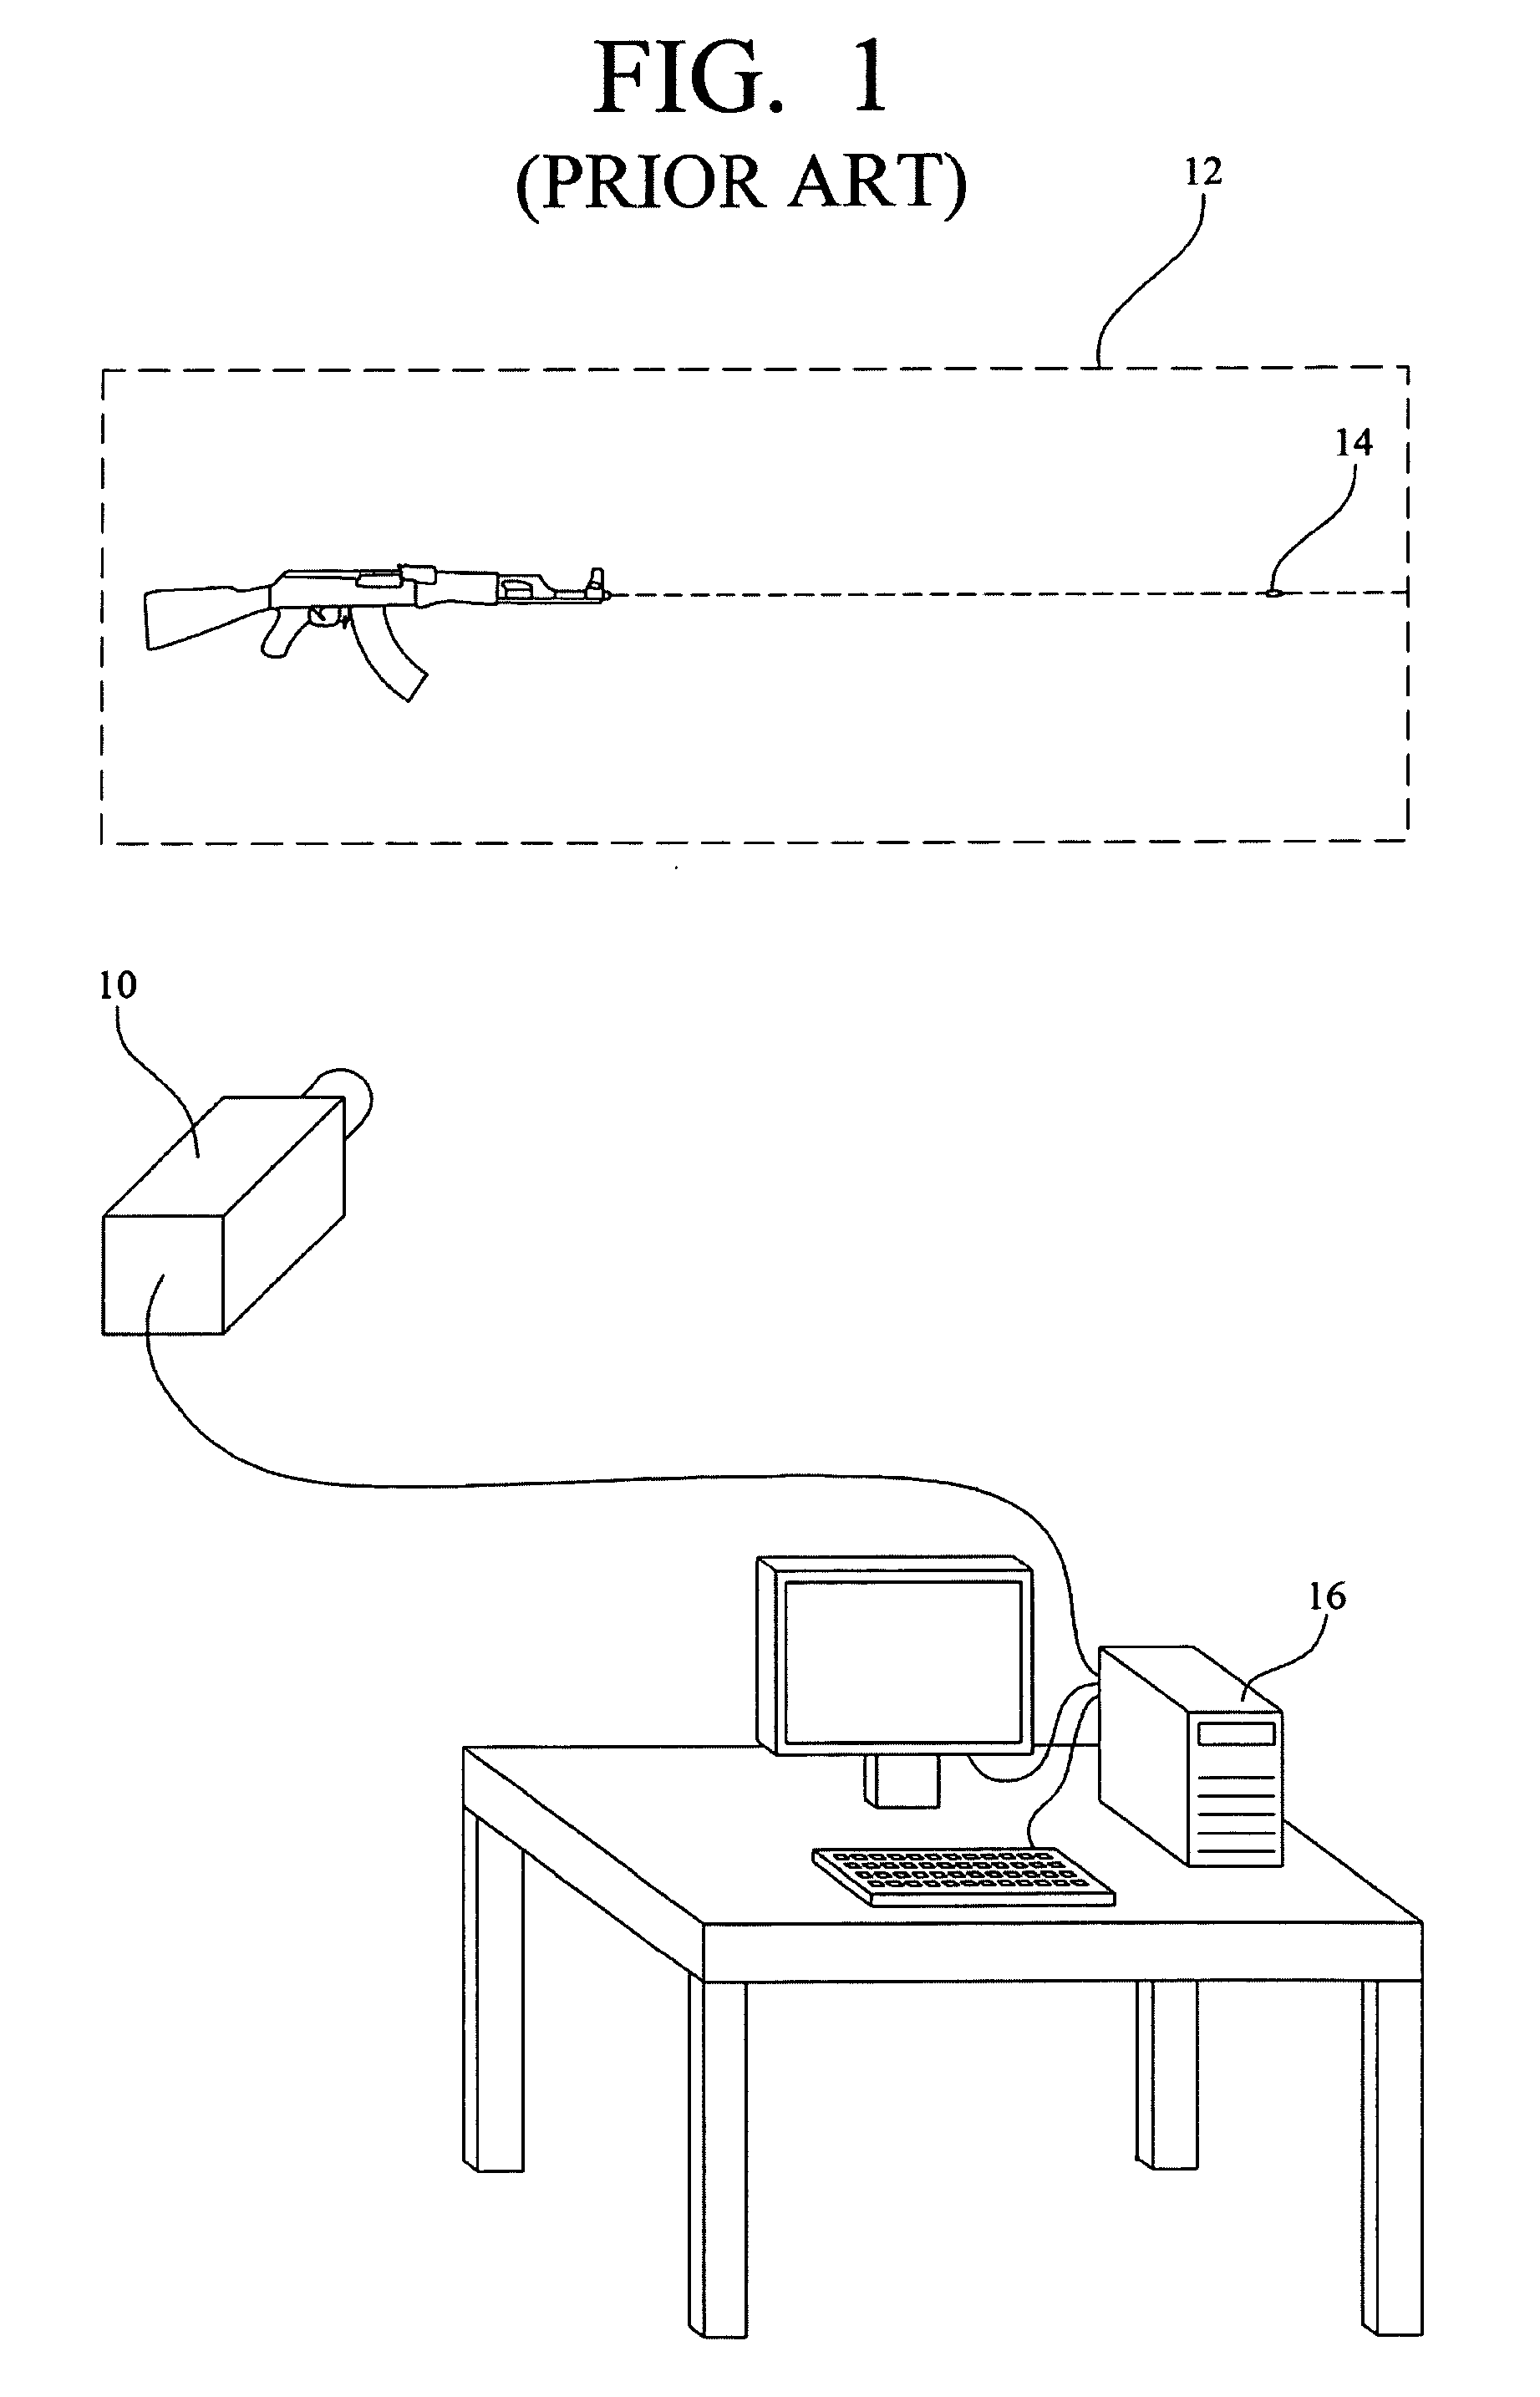 Projectile tracking system